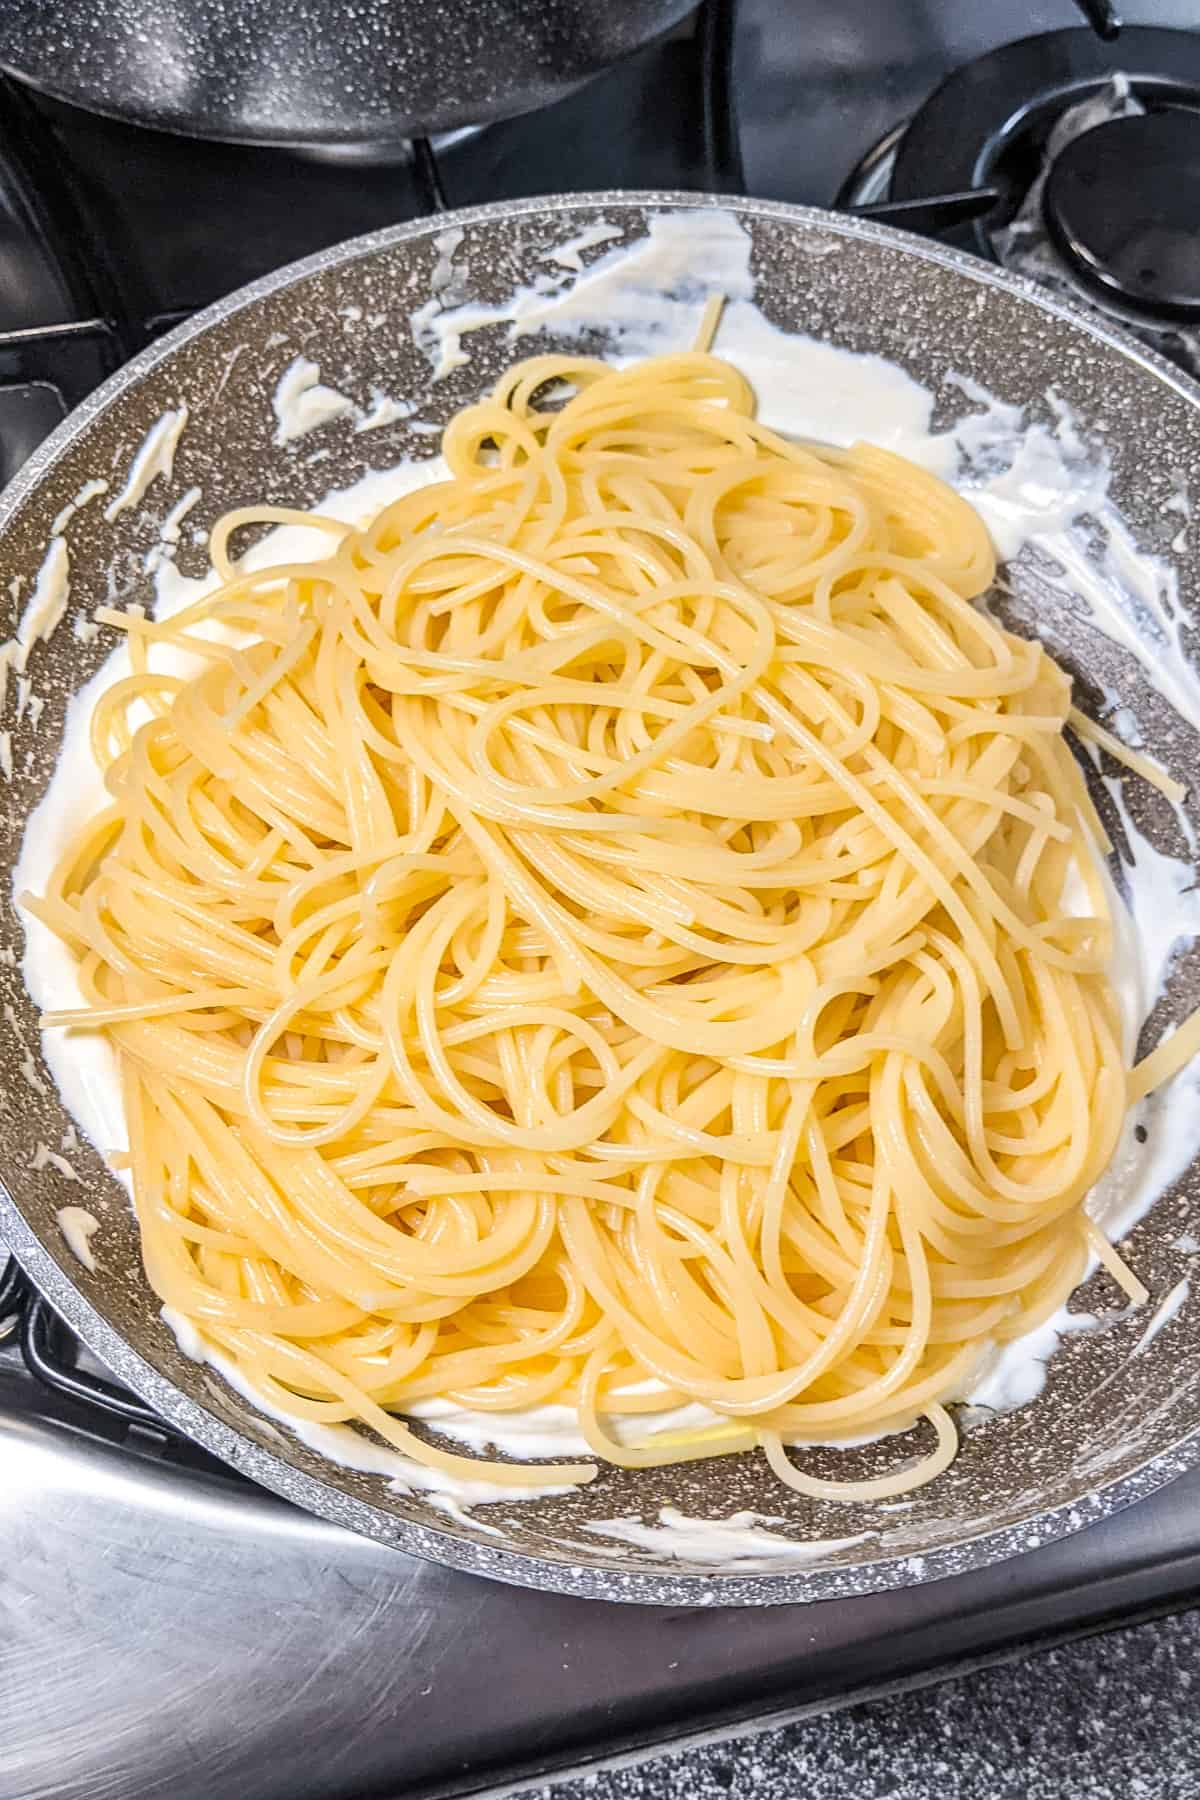 Cooked pasta over melted cream cheese in a frying pan.